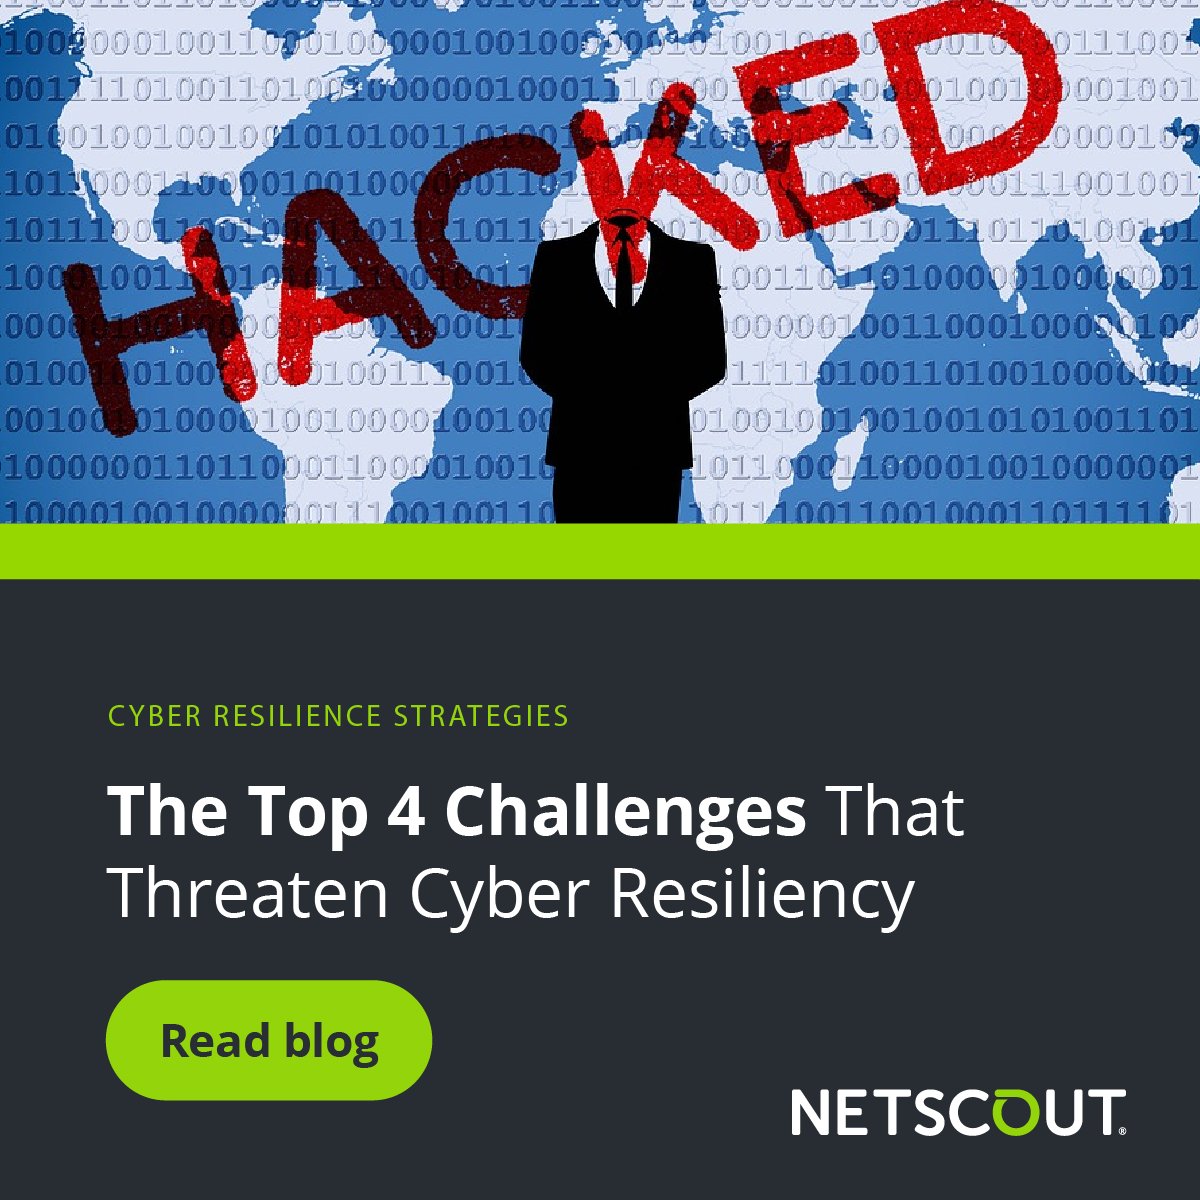 The pandemic has changed the cyber landscape and allowed attackers to develop more advanced threats. Learn the top four most challenging aspects of incorporating cyber resiliency in your organization. @NETSCOUT #NETSCOUTSecurity #Cybersecurity  bit.ly/3jUCLui